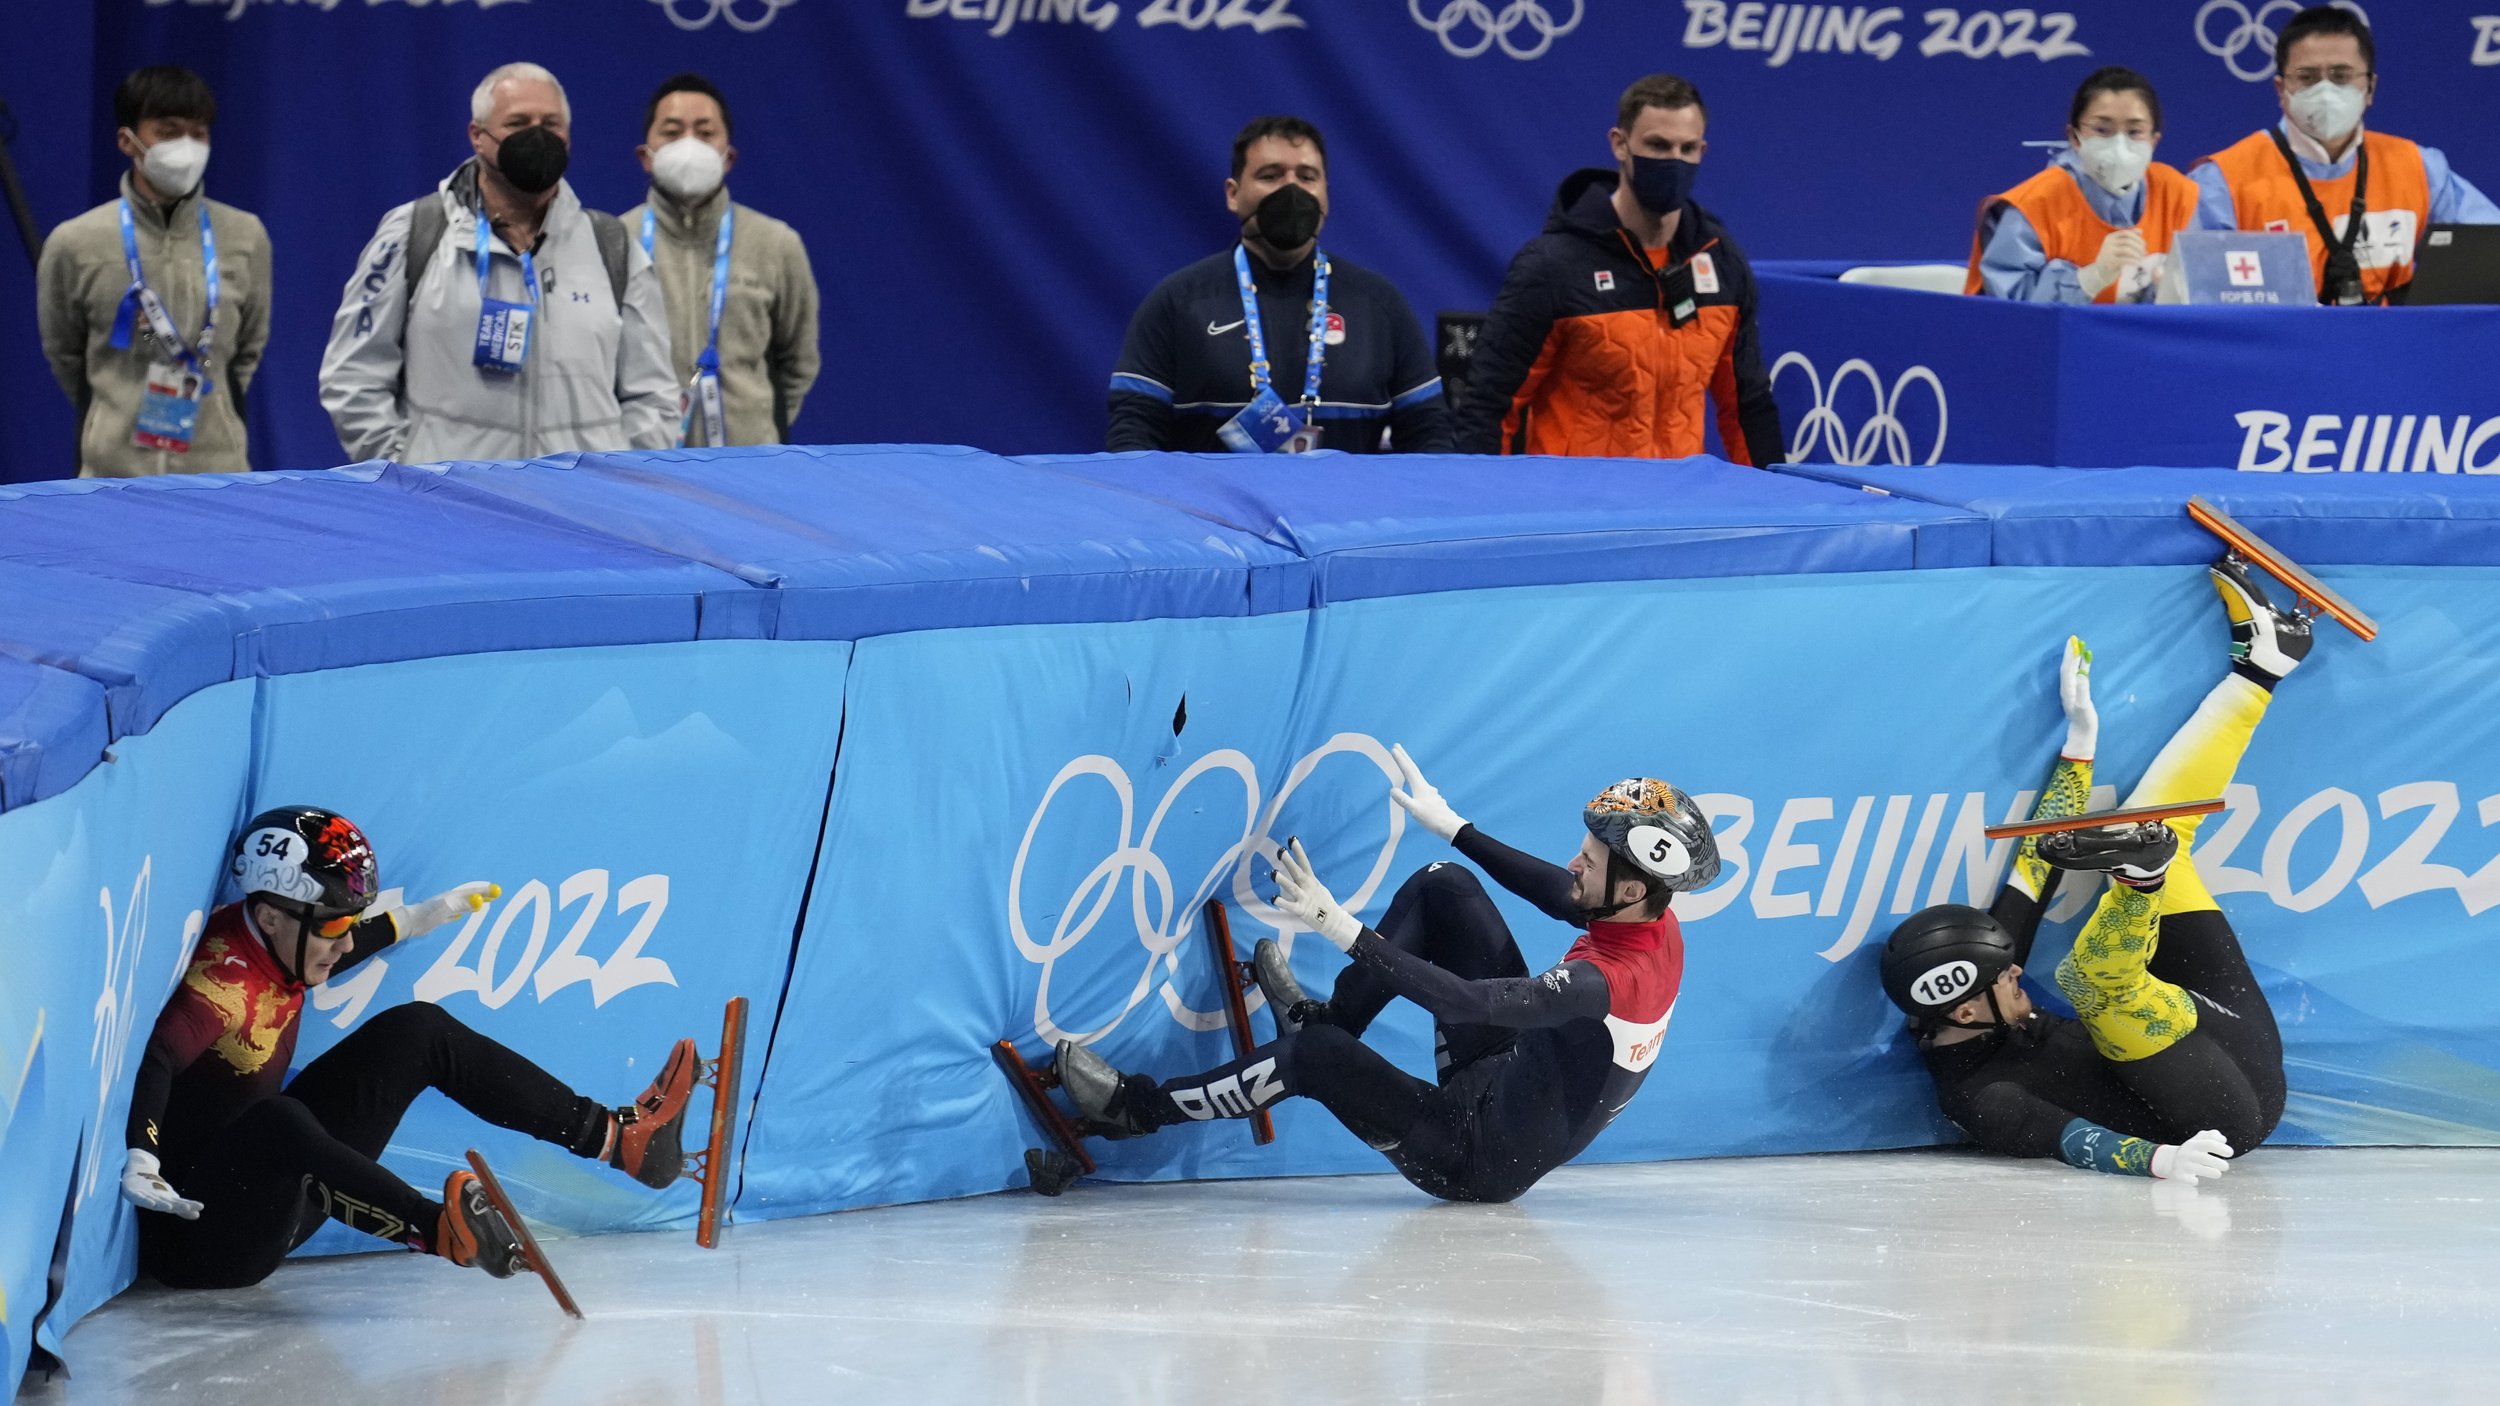  Ren Ziwei, left, of China, Brendan Corey of Australia, and Itzhak Laat, centre, of the Netherlands, crash in their quarterfinal of the men's 1,000-meter during the short track speedskating competition at the 2022 Winter Olympics, Monday, Feb. 7, 202